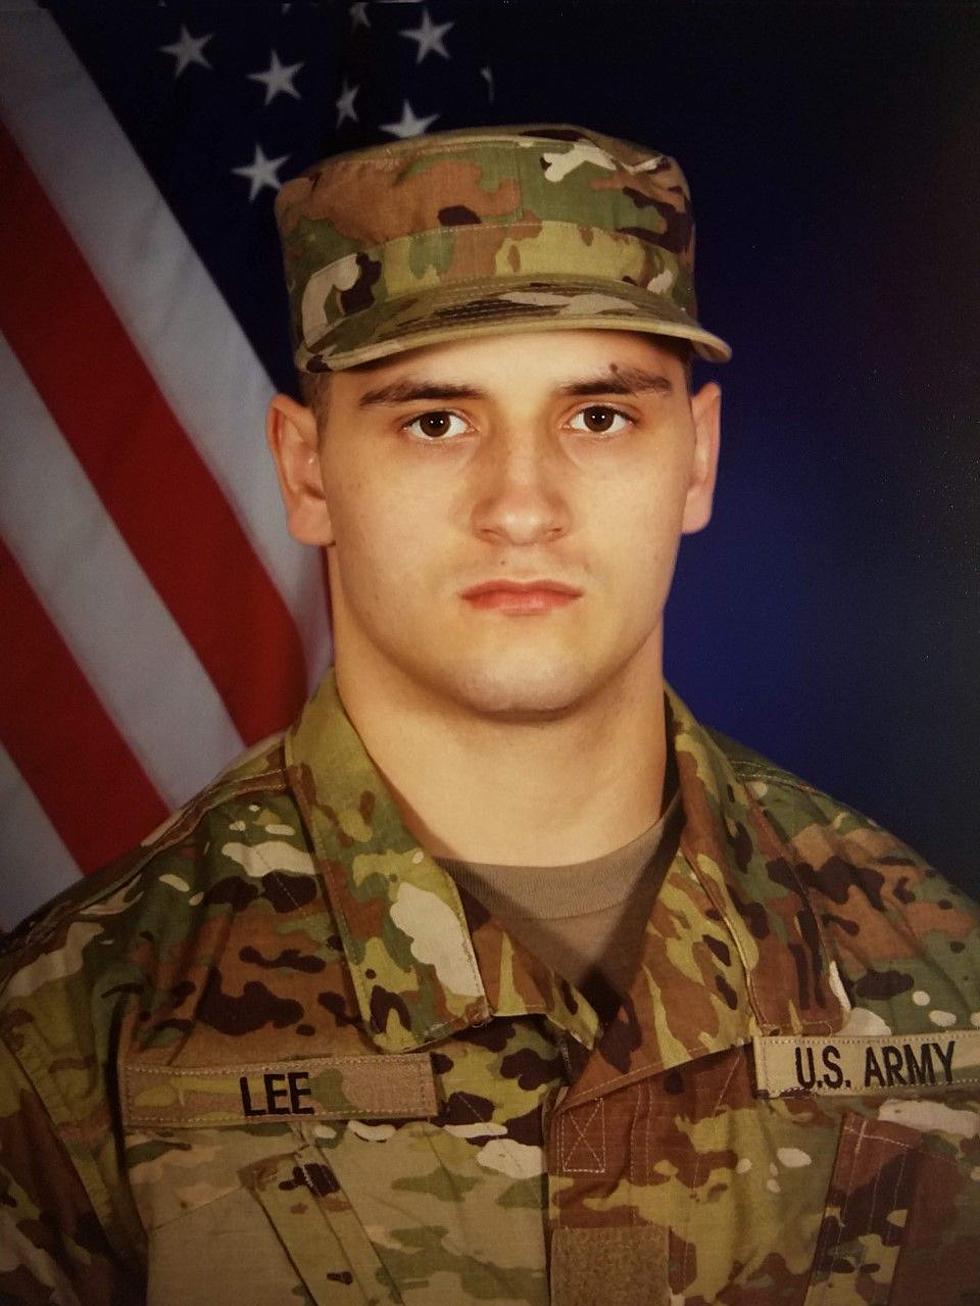 IL Man Survives 3 Near-Death Moments While Serving in the Army